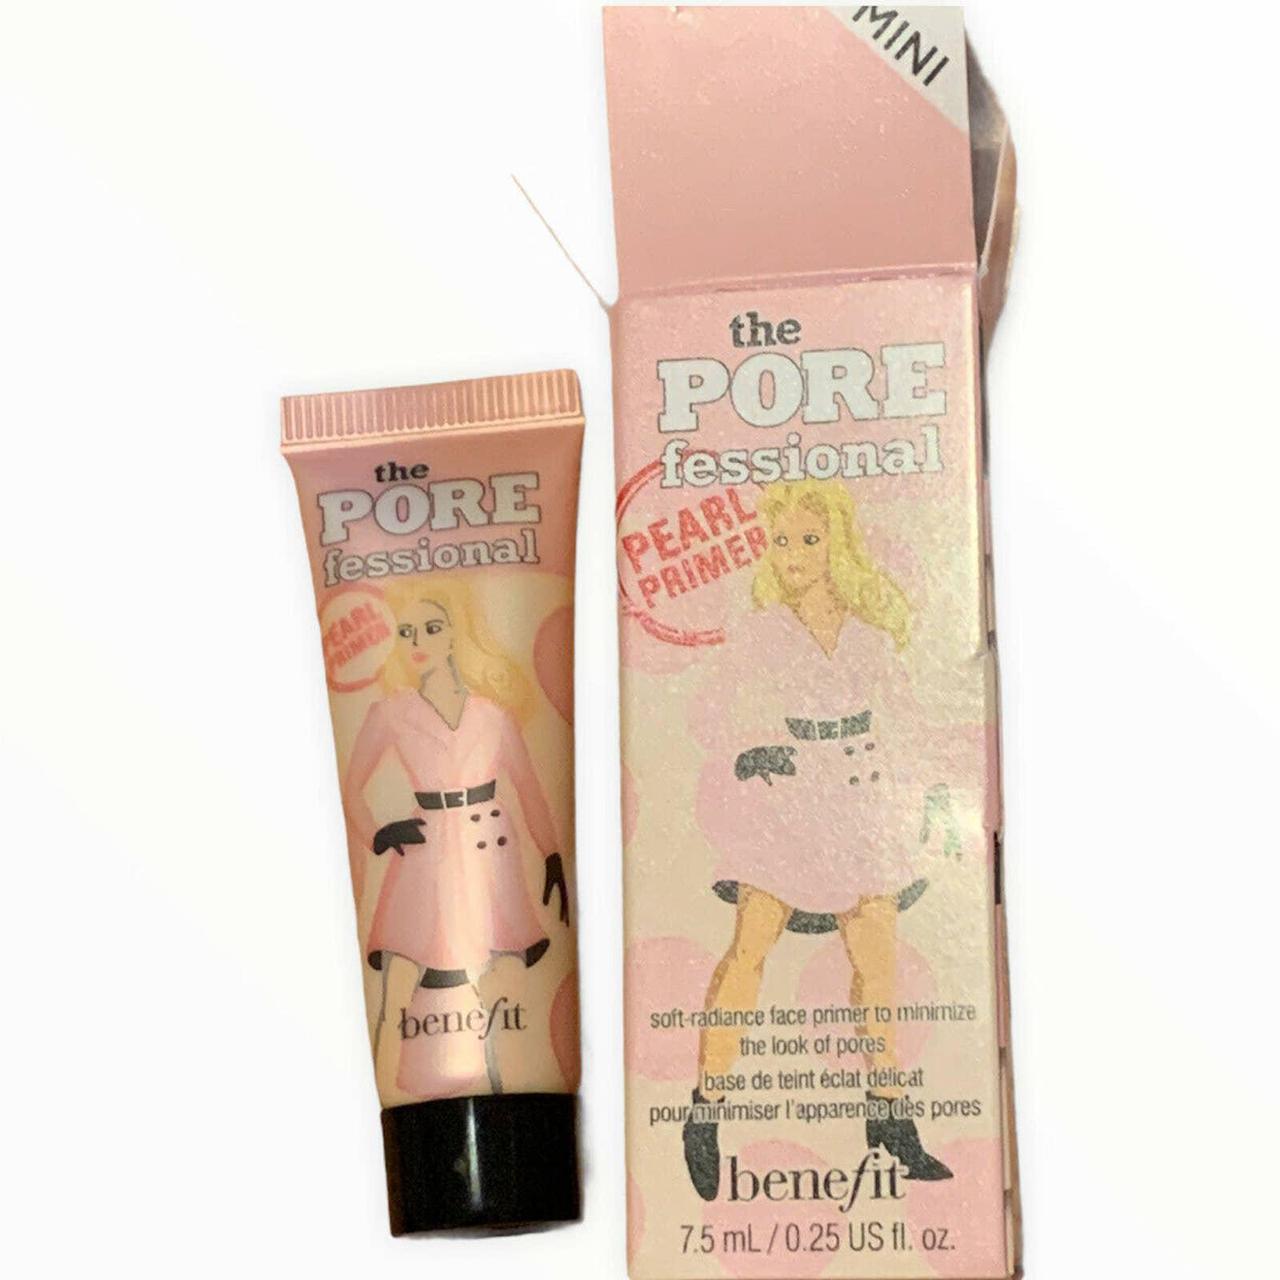 Product Image 2 - 2 boxes of BENEFIT THE